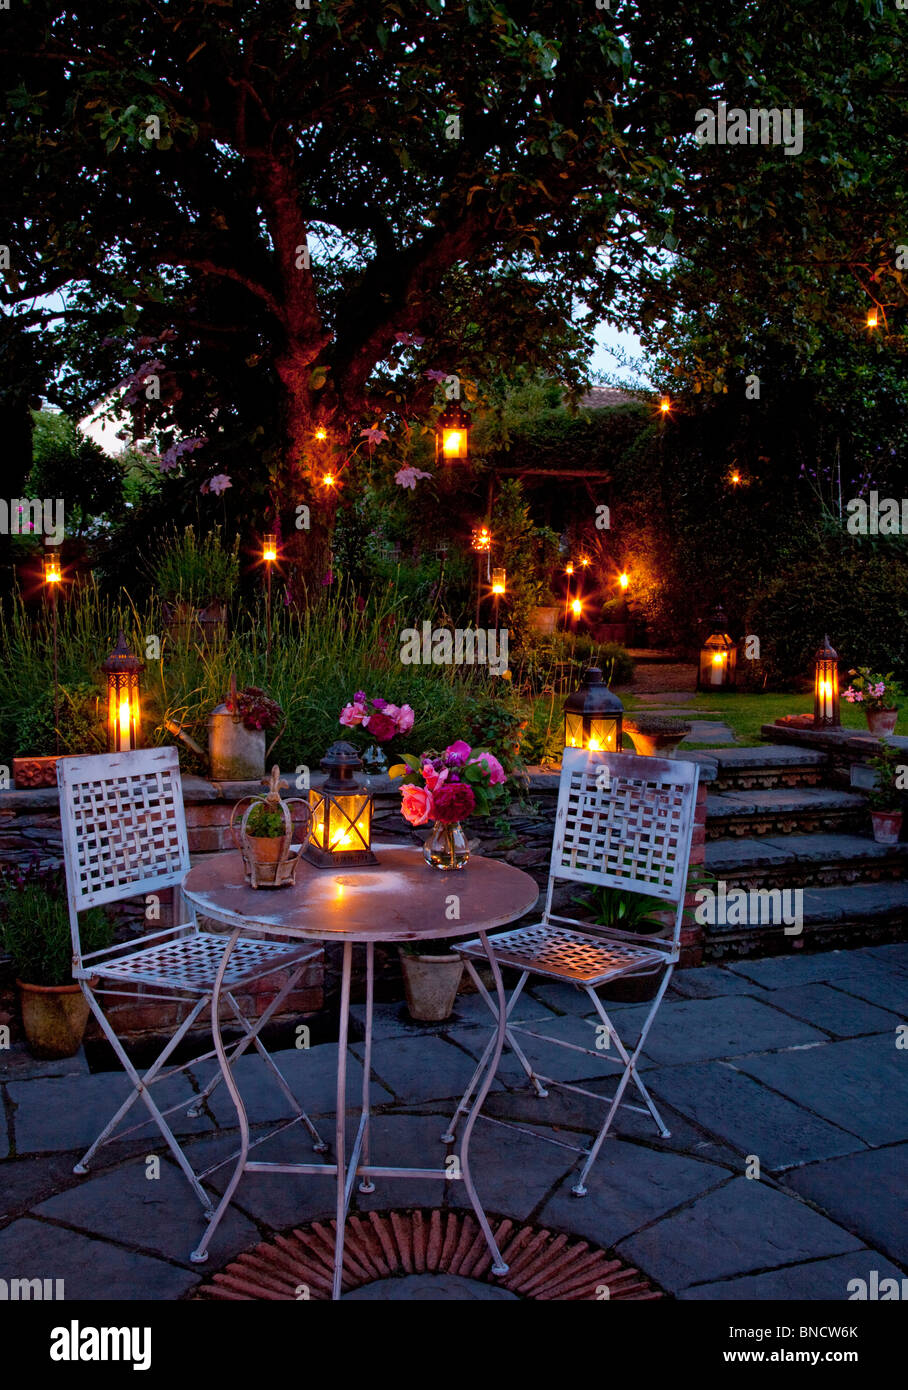 Metal table and chairs on patio with candles and lanterns in garden at night Stock Photo